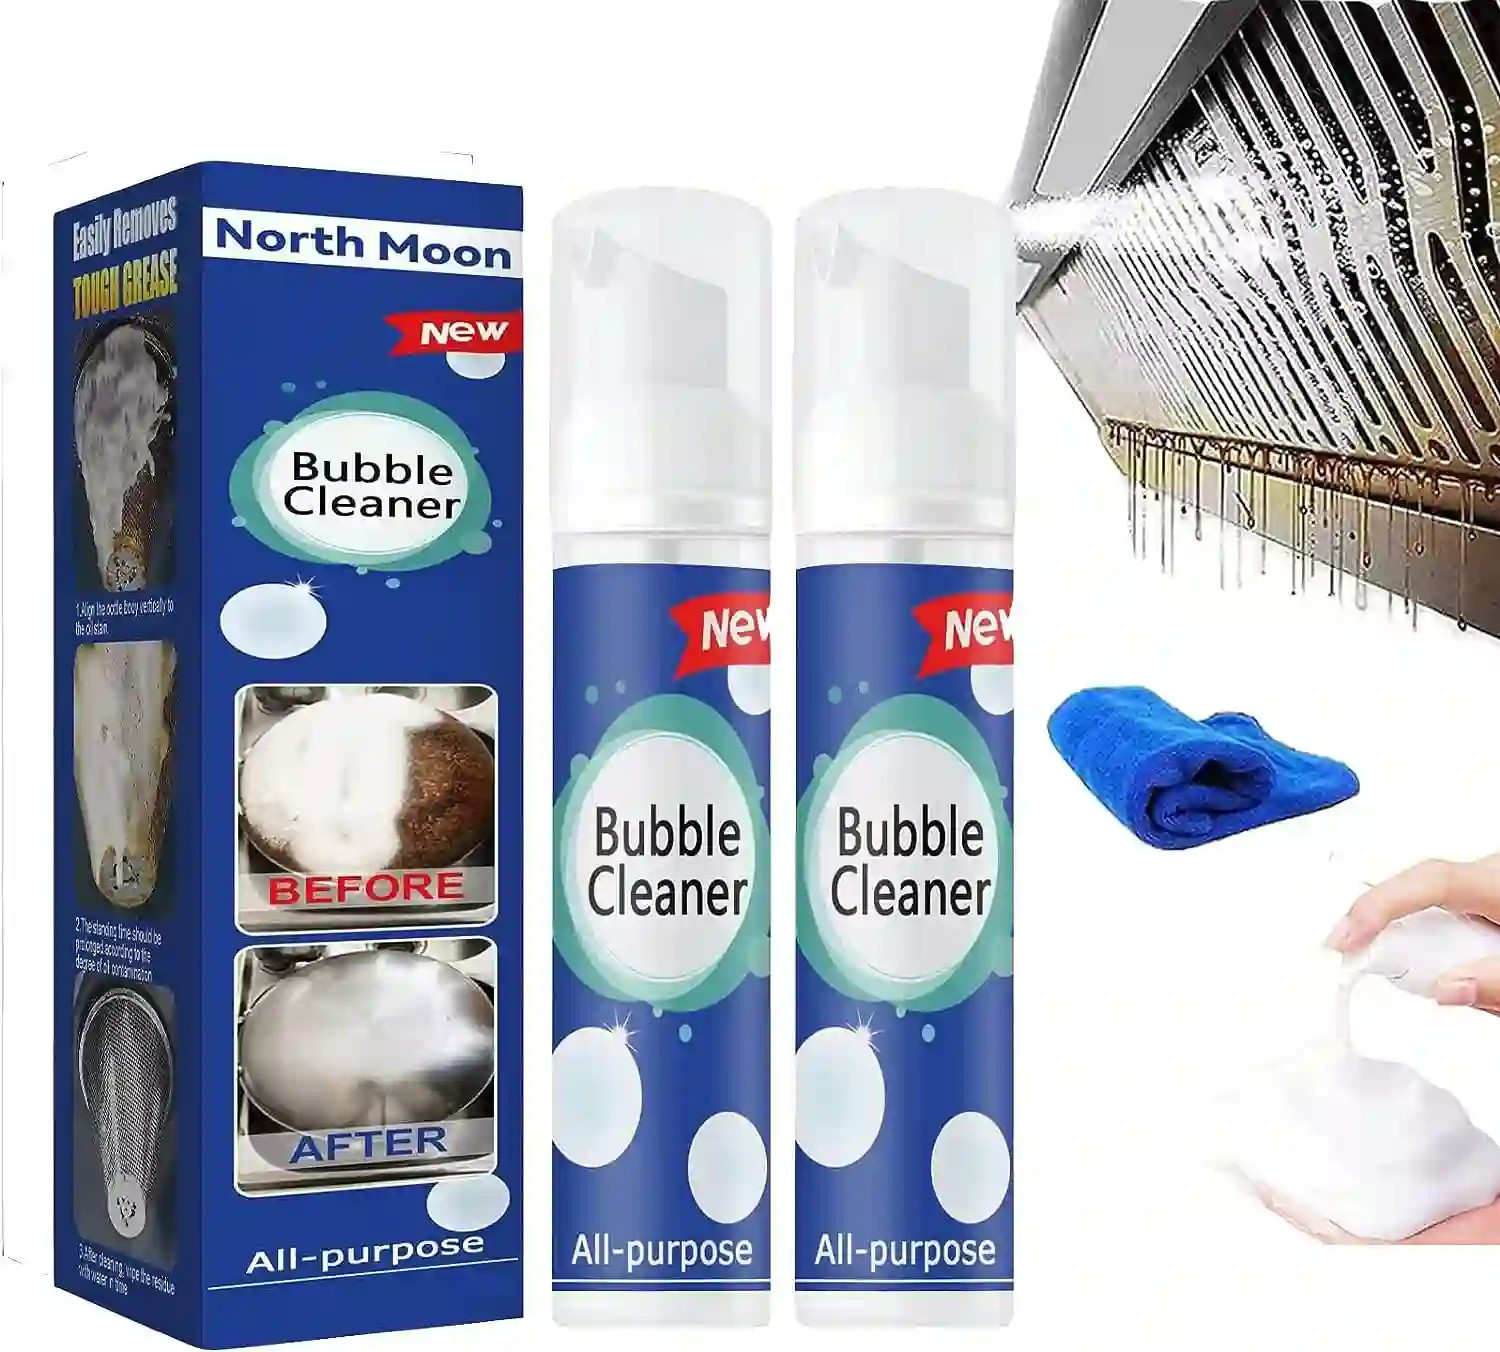 You are currently viewing North Moon Bubble Cleaner Reviews: Is It Legit or a Scam?